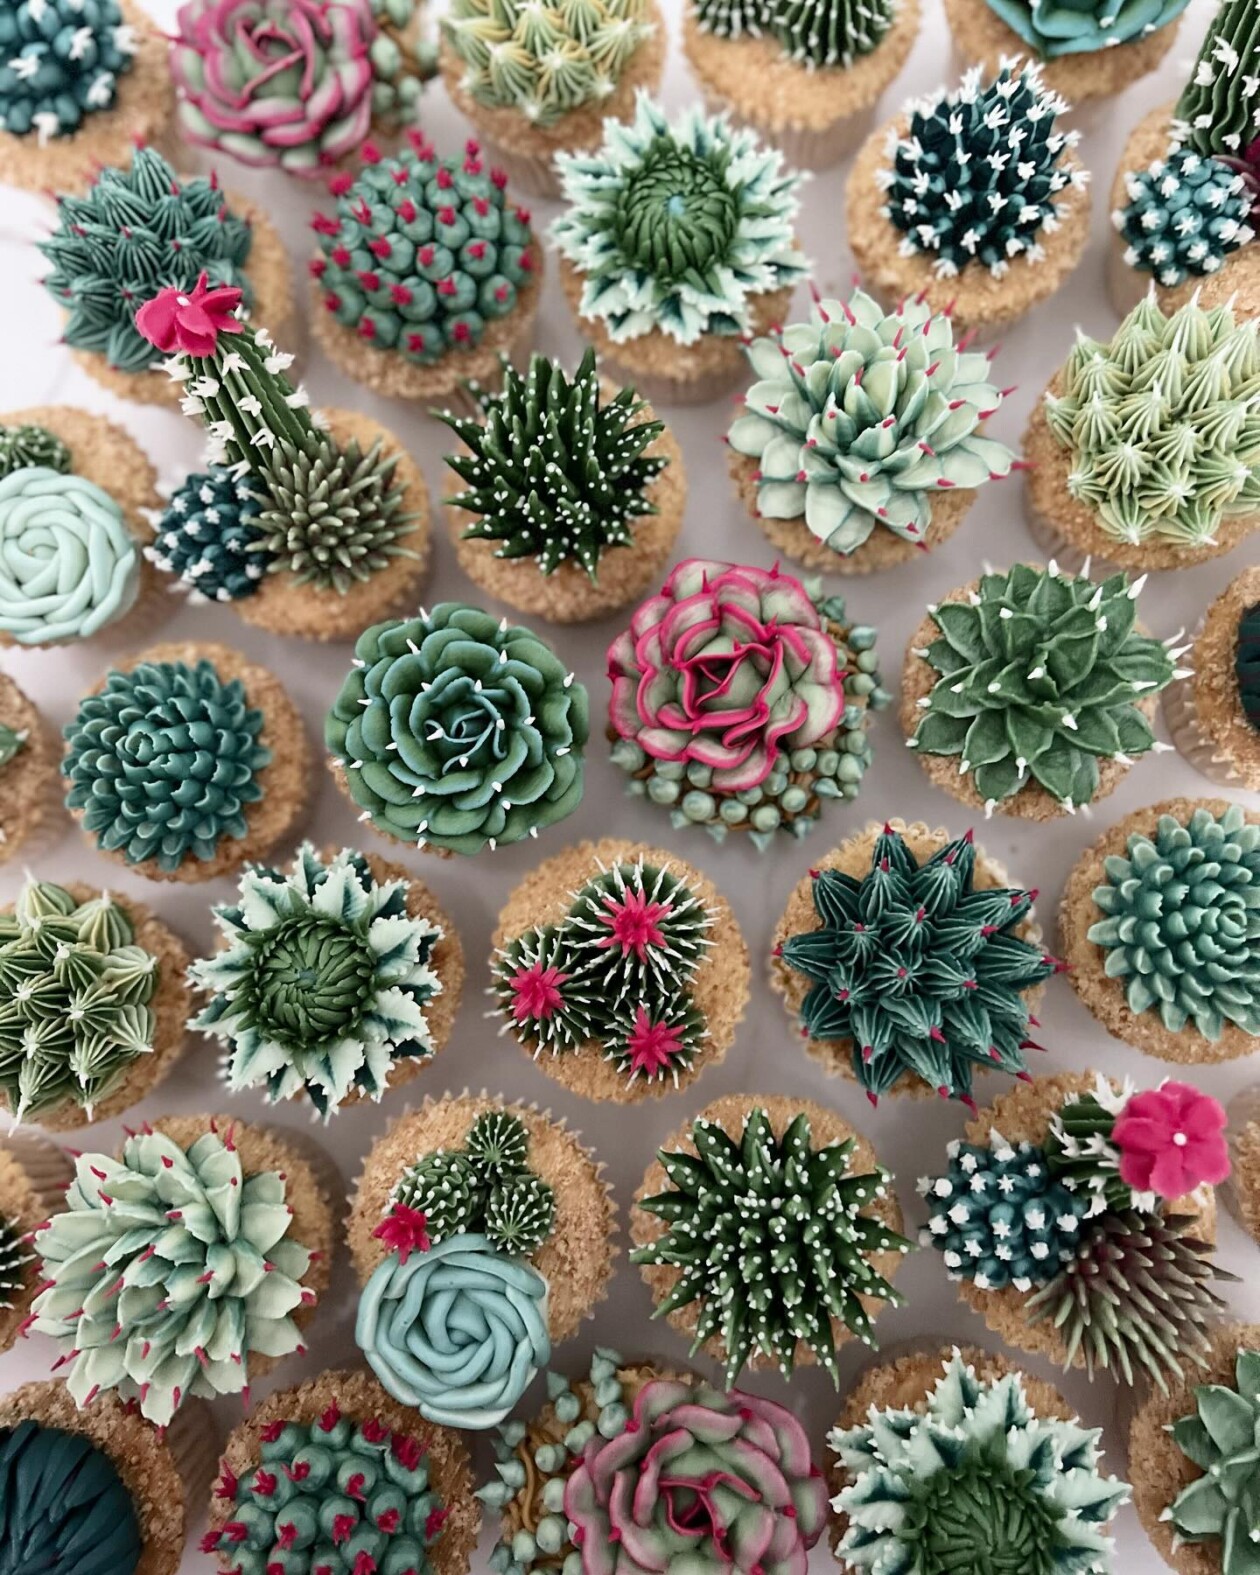 Gorgeous Cupcakes Decorated With Buttercream Flowers And Succulents By Kerry's Bouqcakes (15)